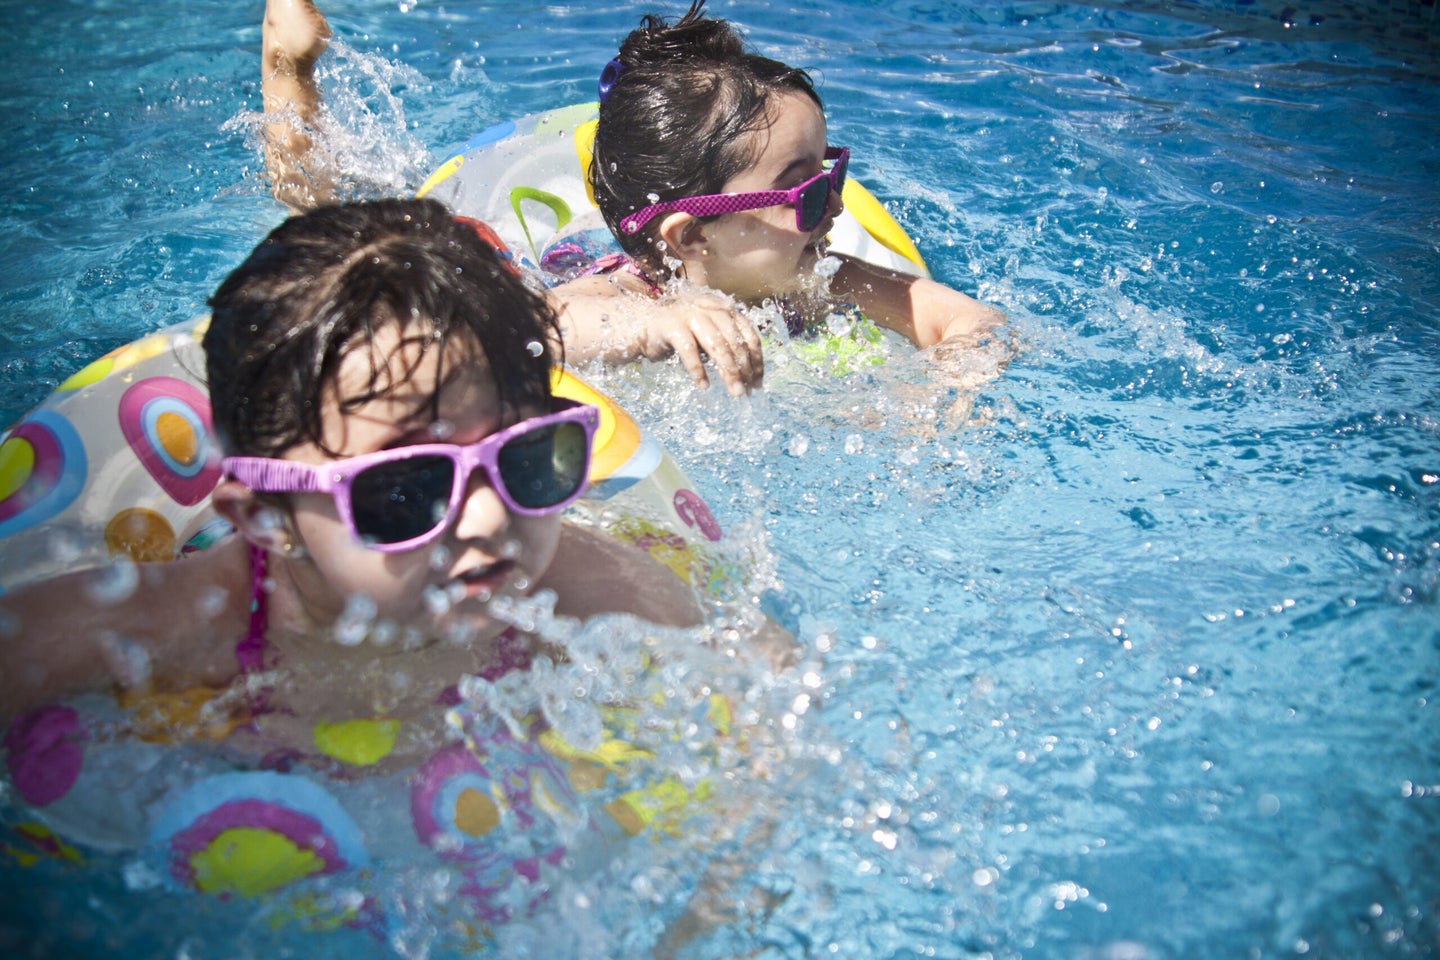 Swimming pools are full of poop, but they probably won’t make you sick